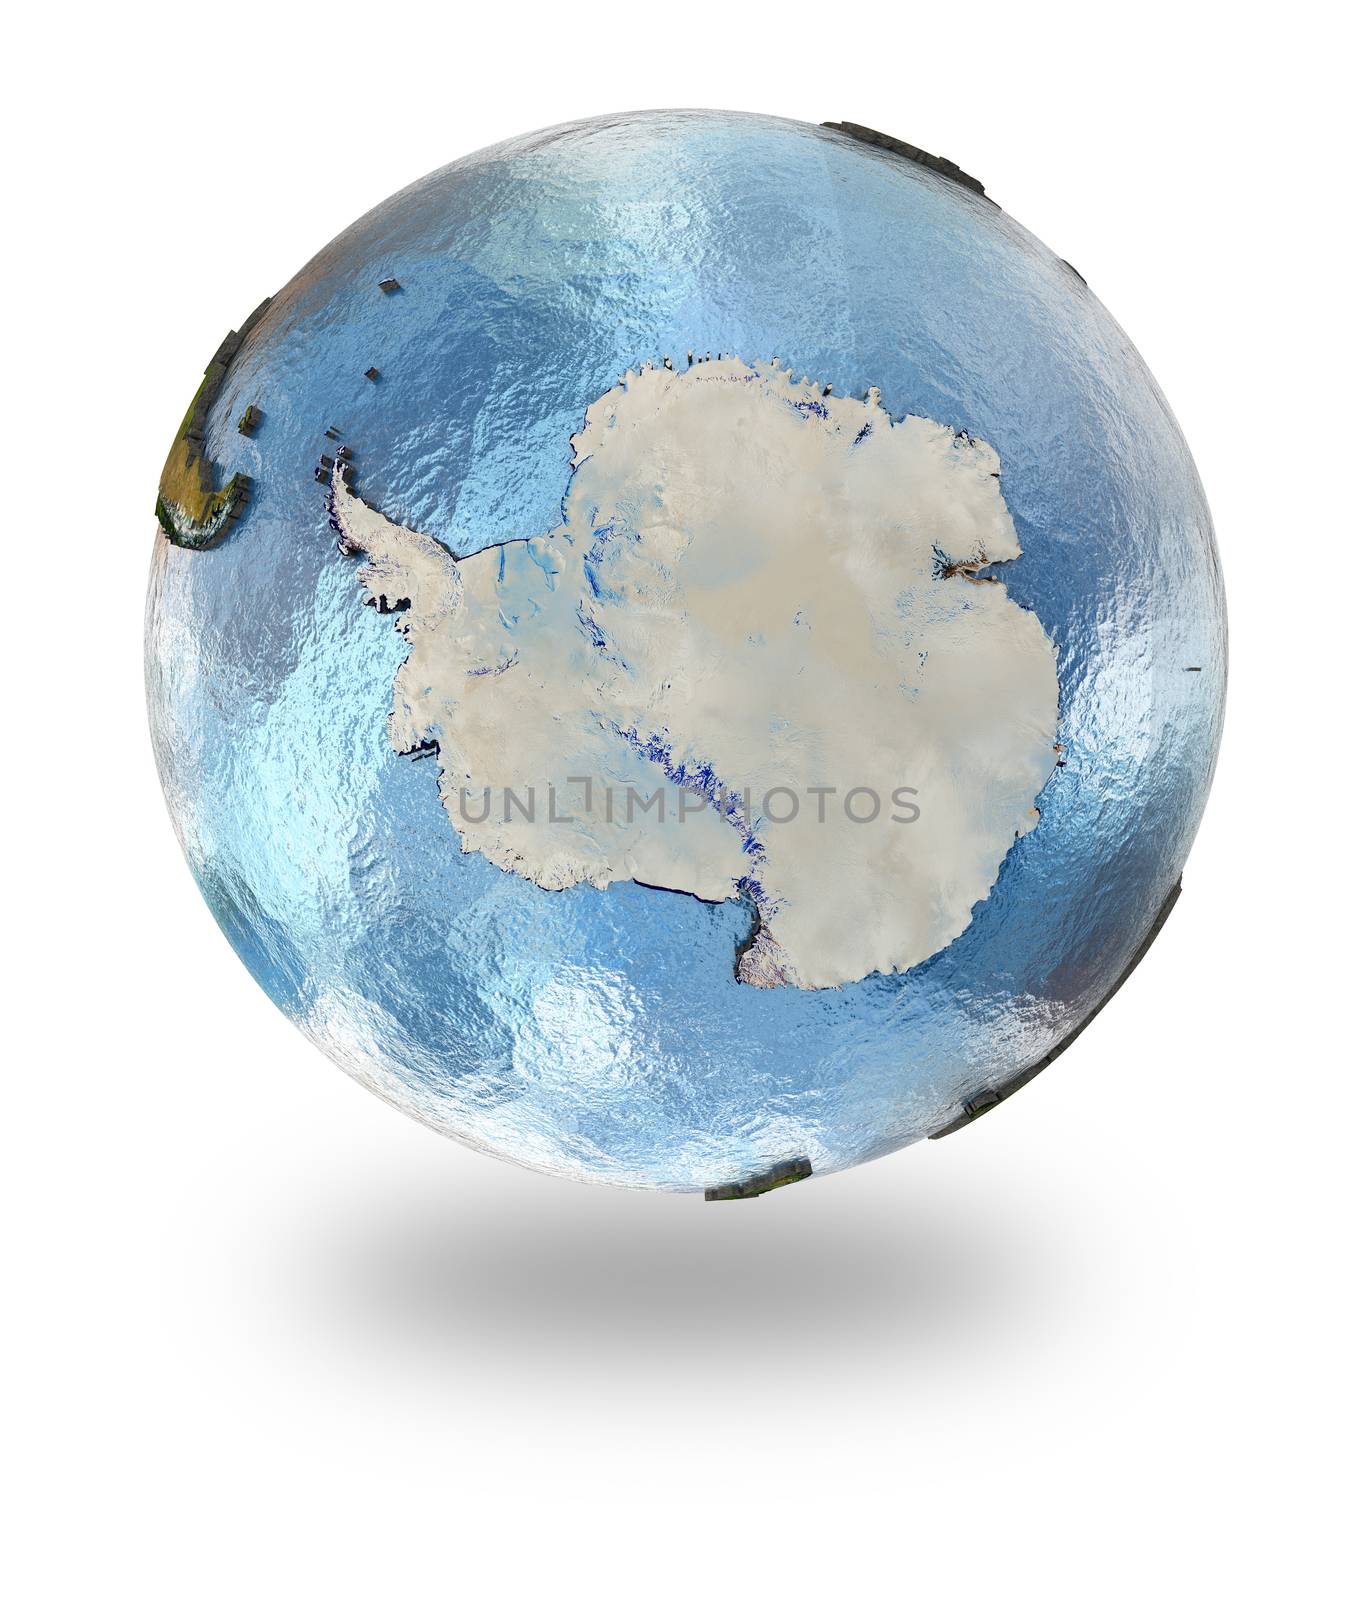 Highly detailed planet Earth with embossed continents and visible country borders featuring Antarctica. Isolated on white background. Elements of this image furnished by NASA.